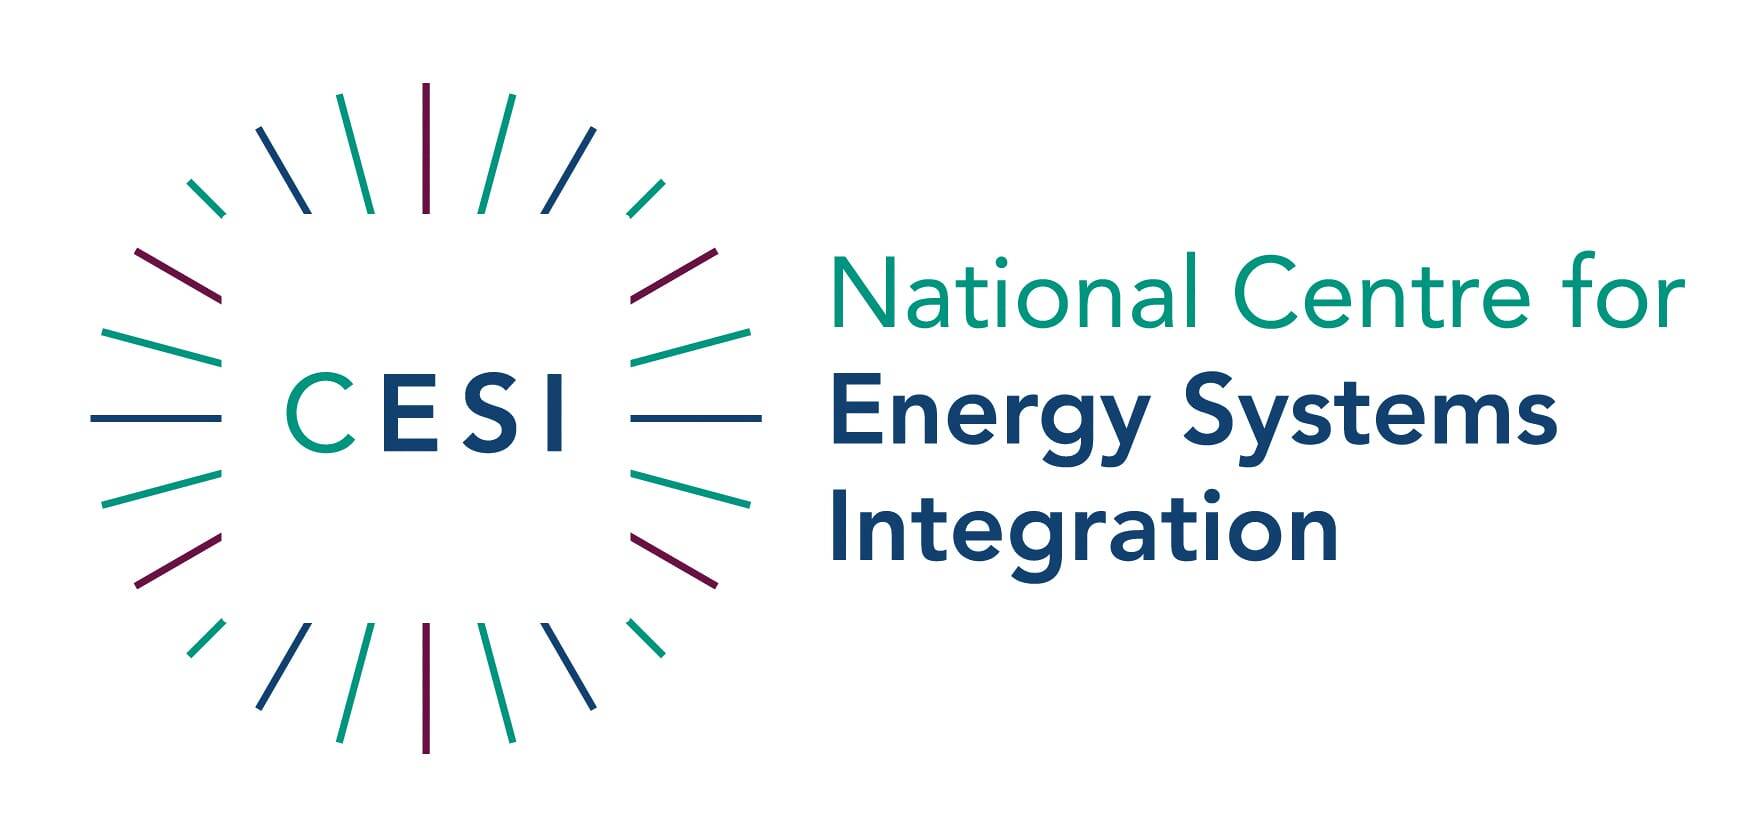 National Centre for Energy Systems Integration